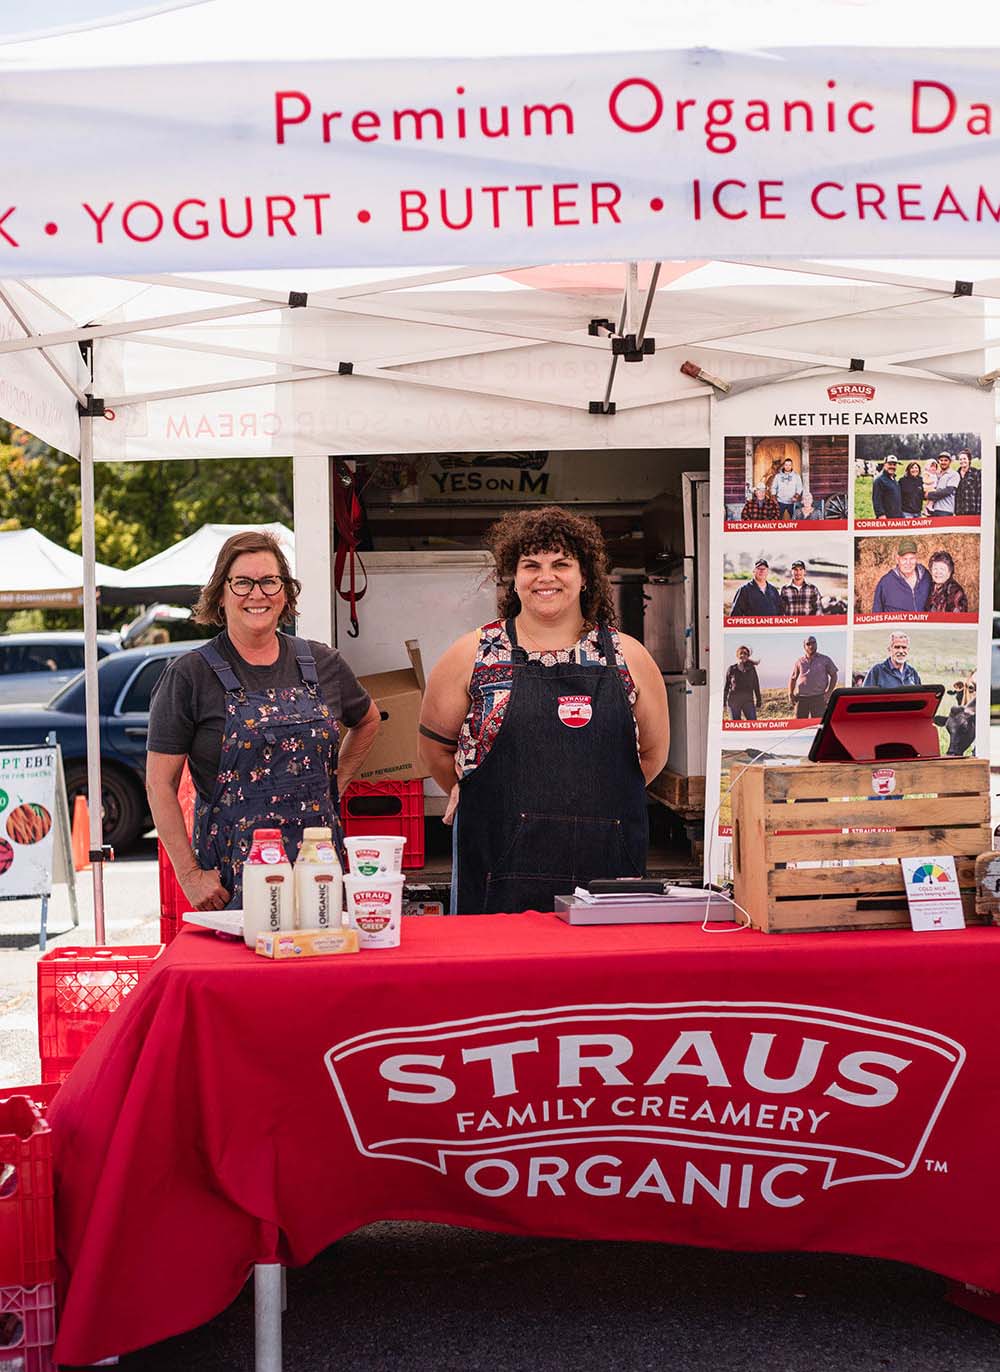 straus family creamery tent at farmers market